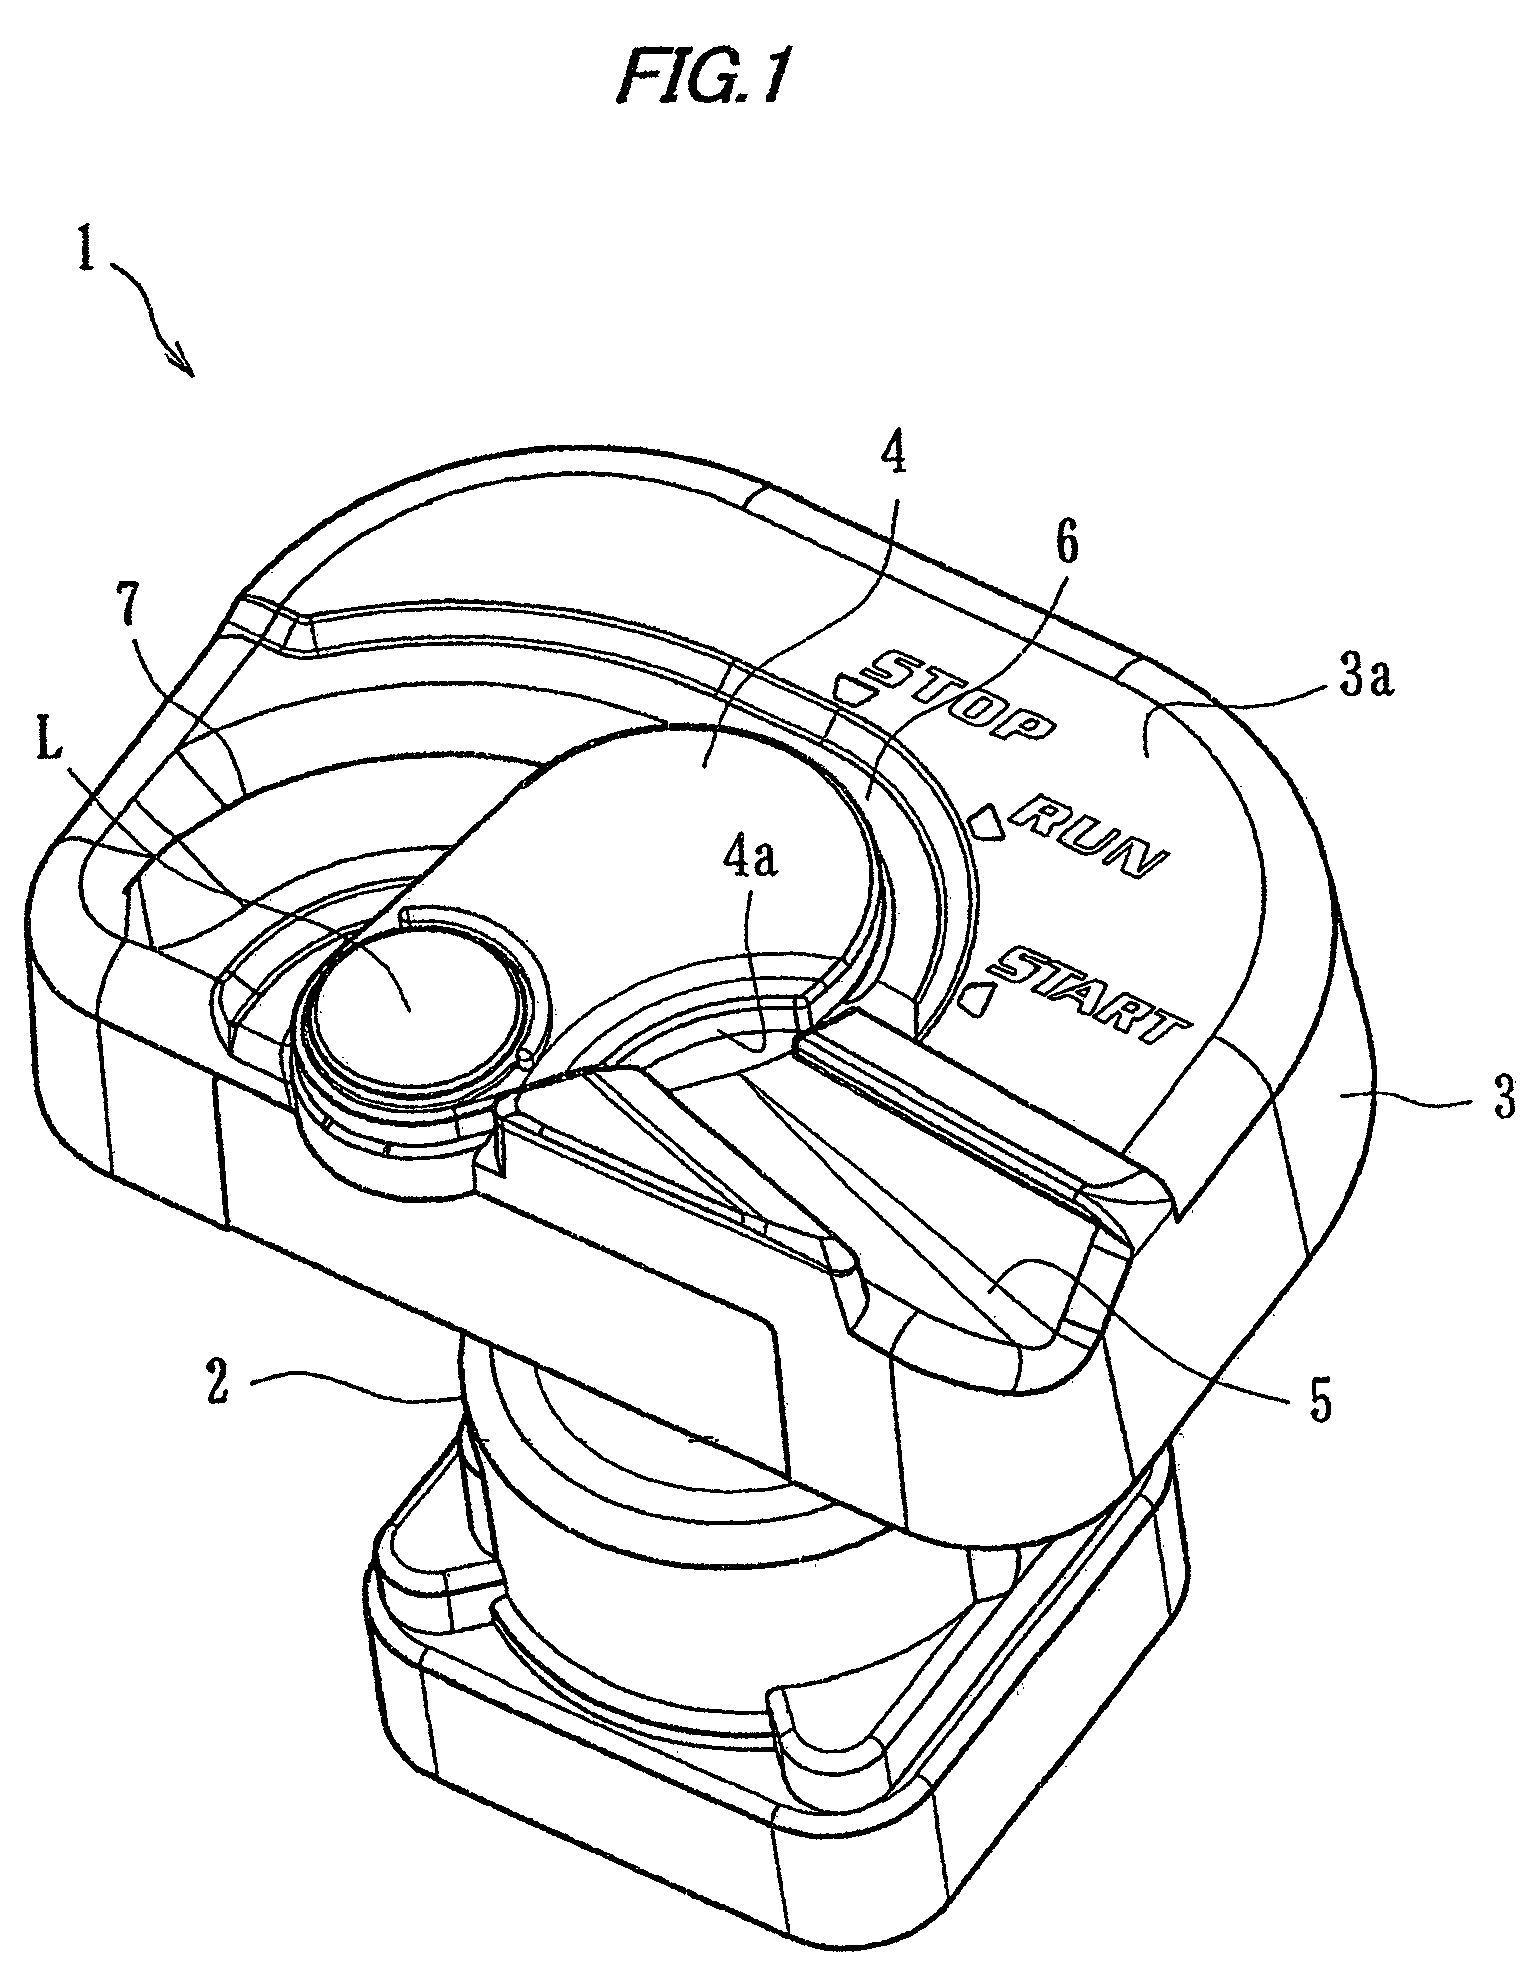 Ignition switch device